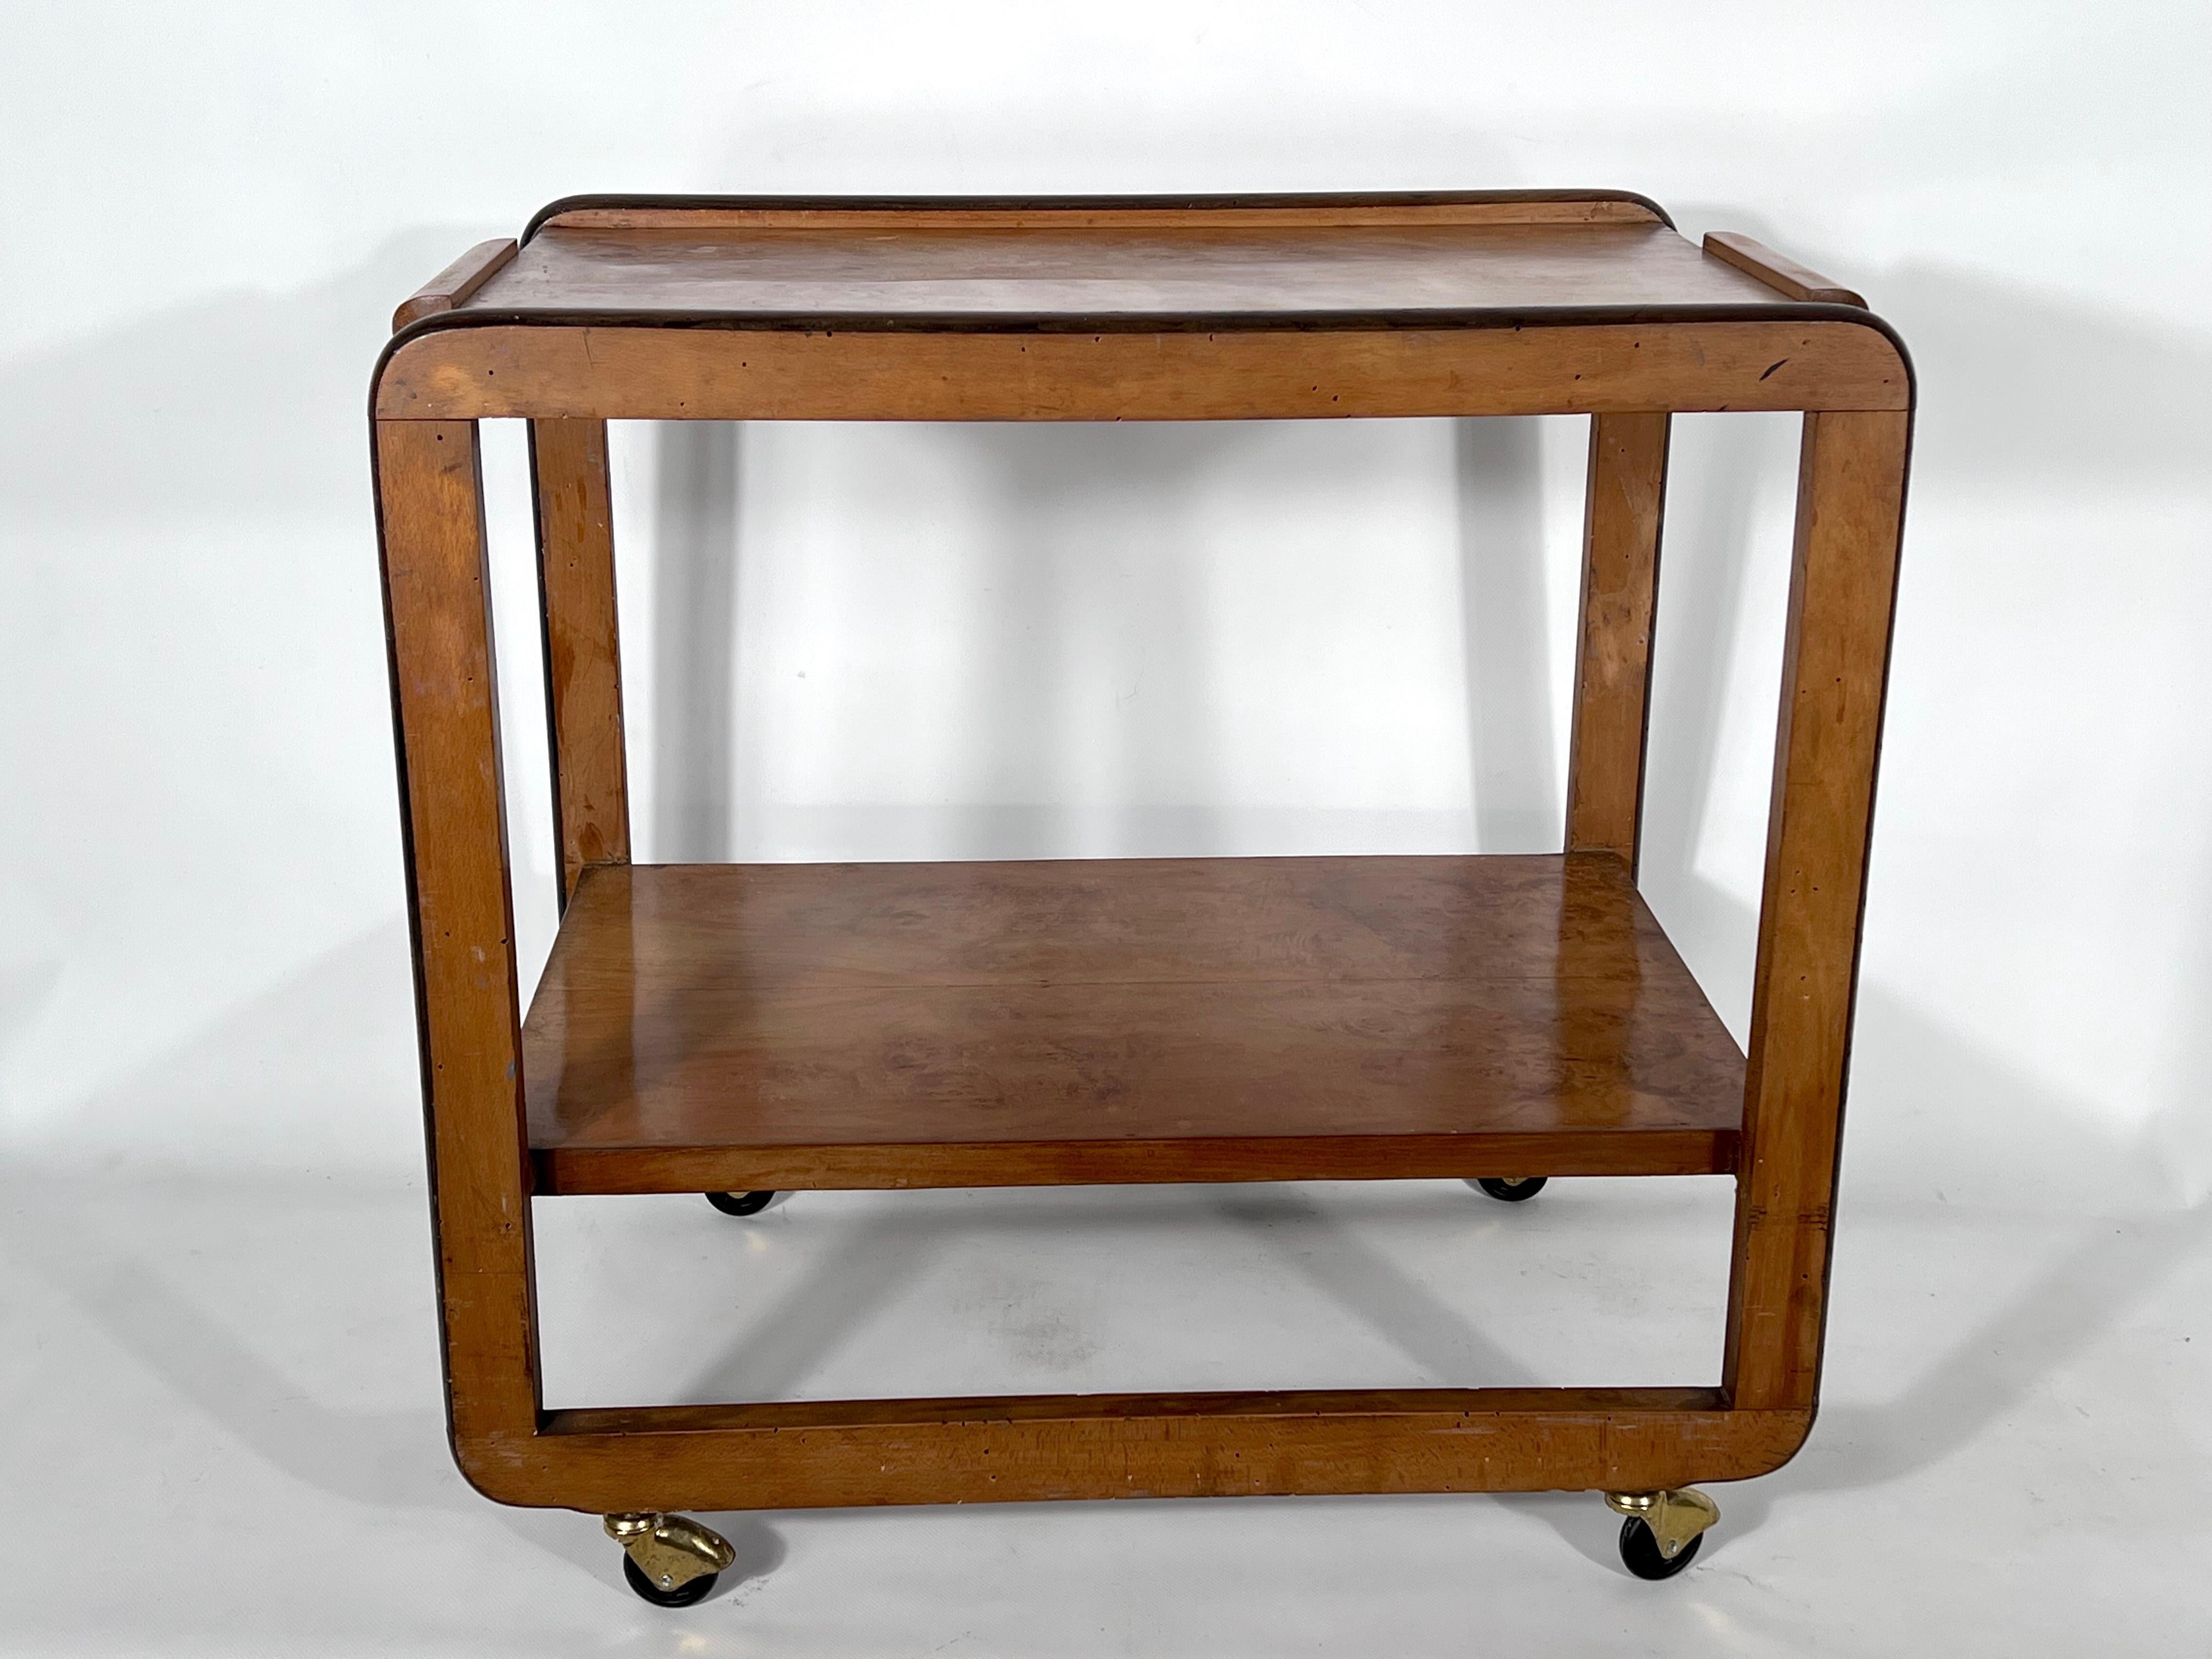 Original vintage condition with normal trace of age and use for this serving table or bar cart made from wood and brass wheels. Produced in Italy during the 30s.